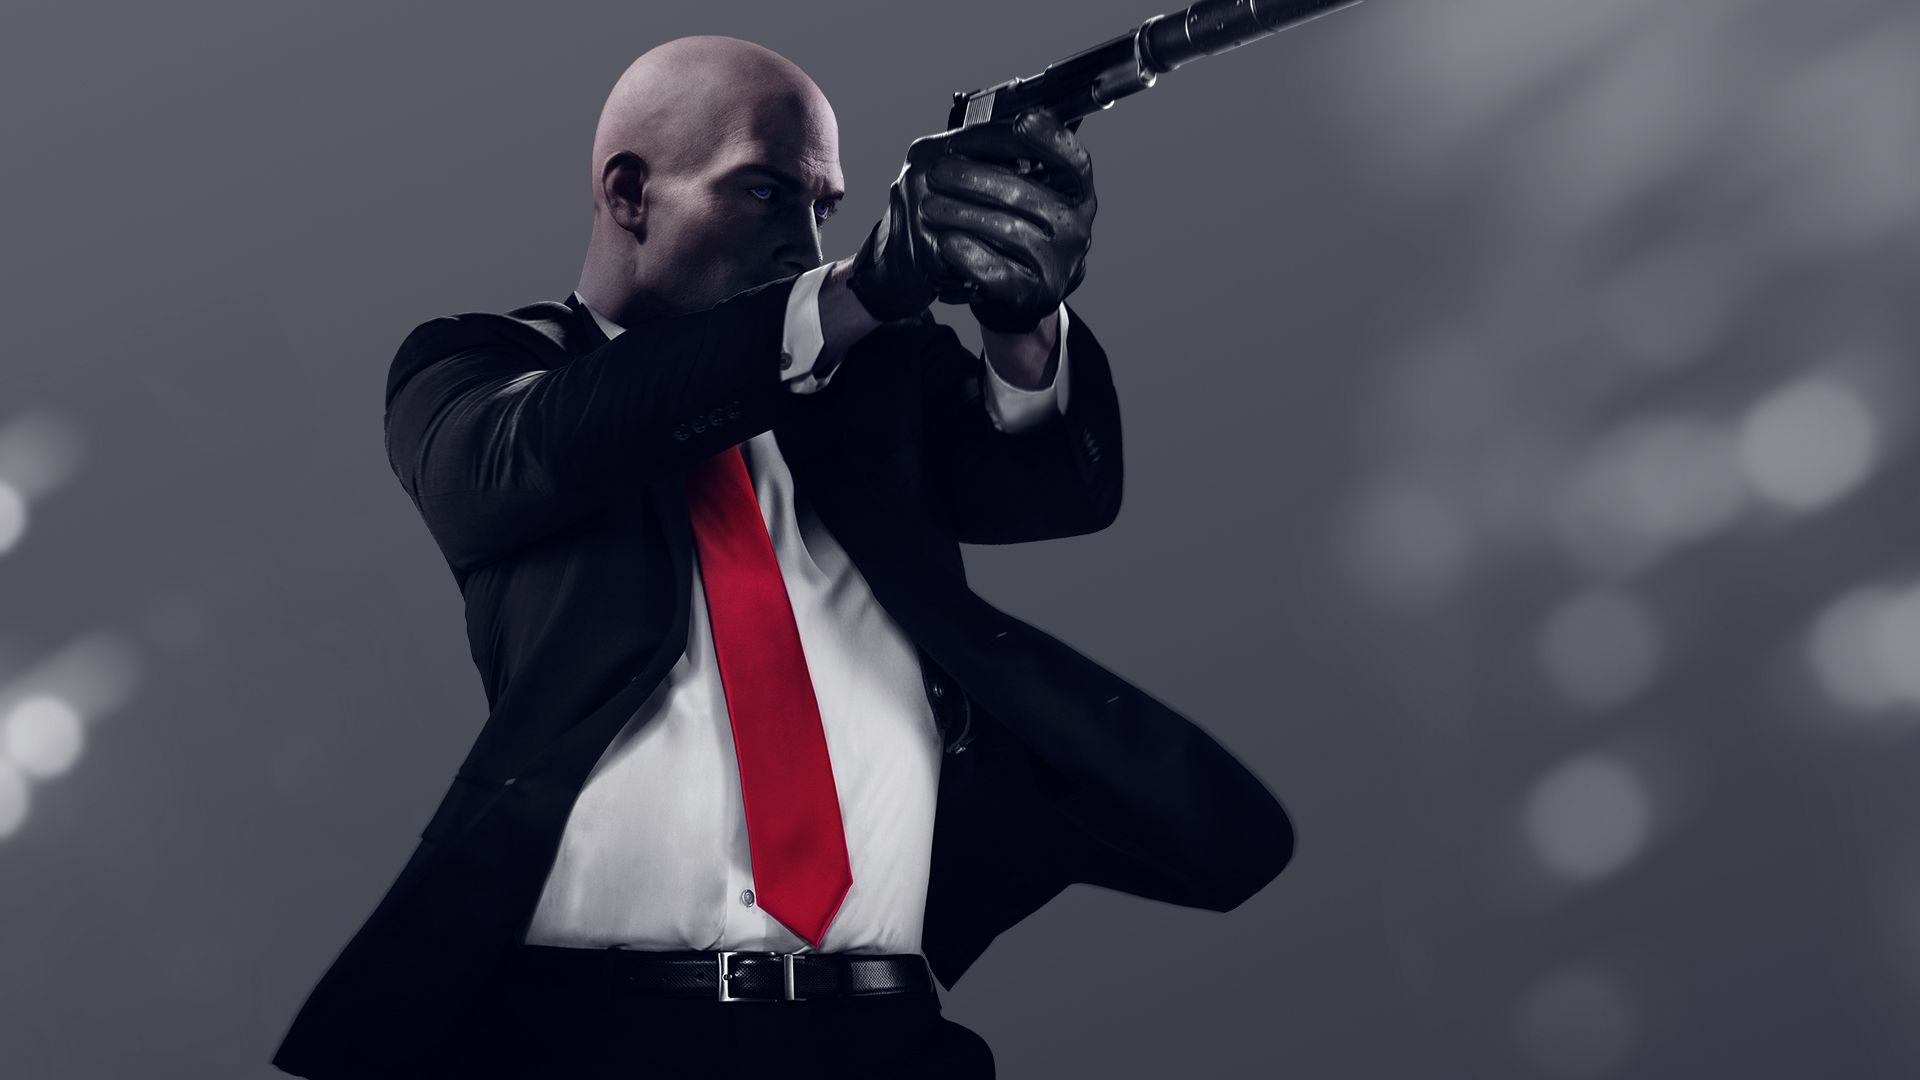 Hitman 3 will see the world of assassination return in January